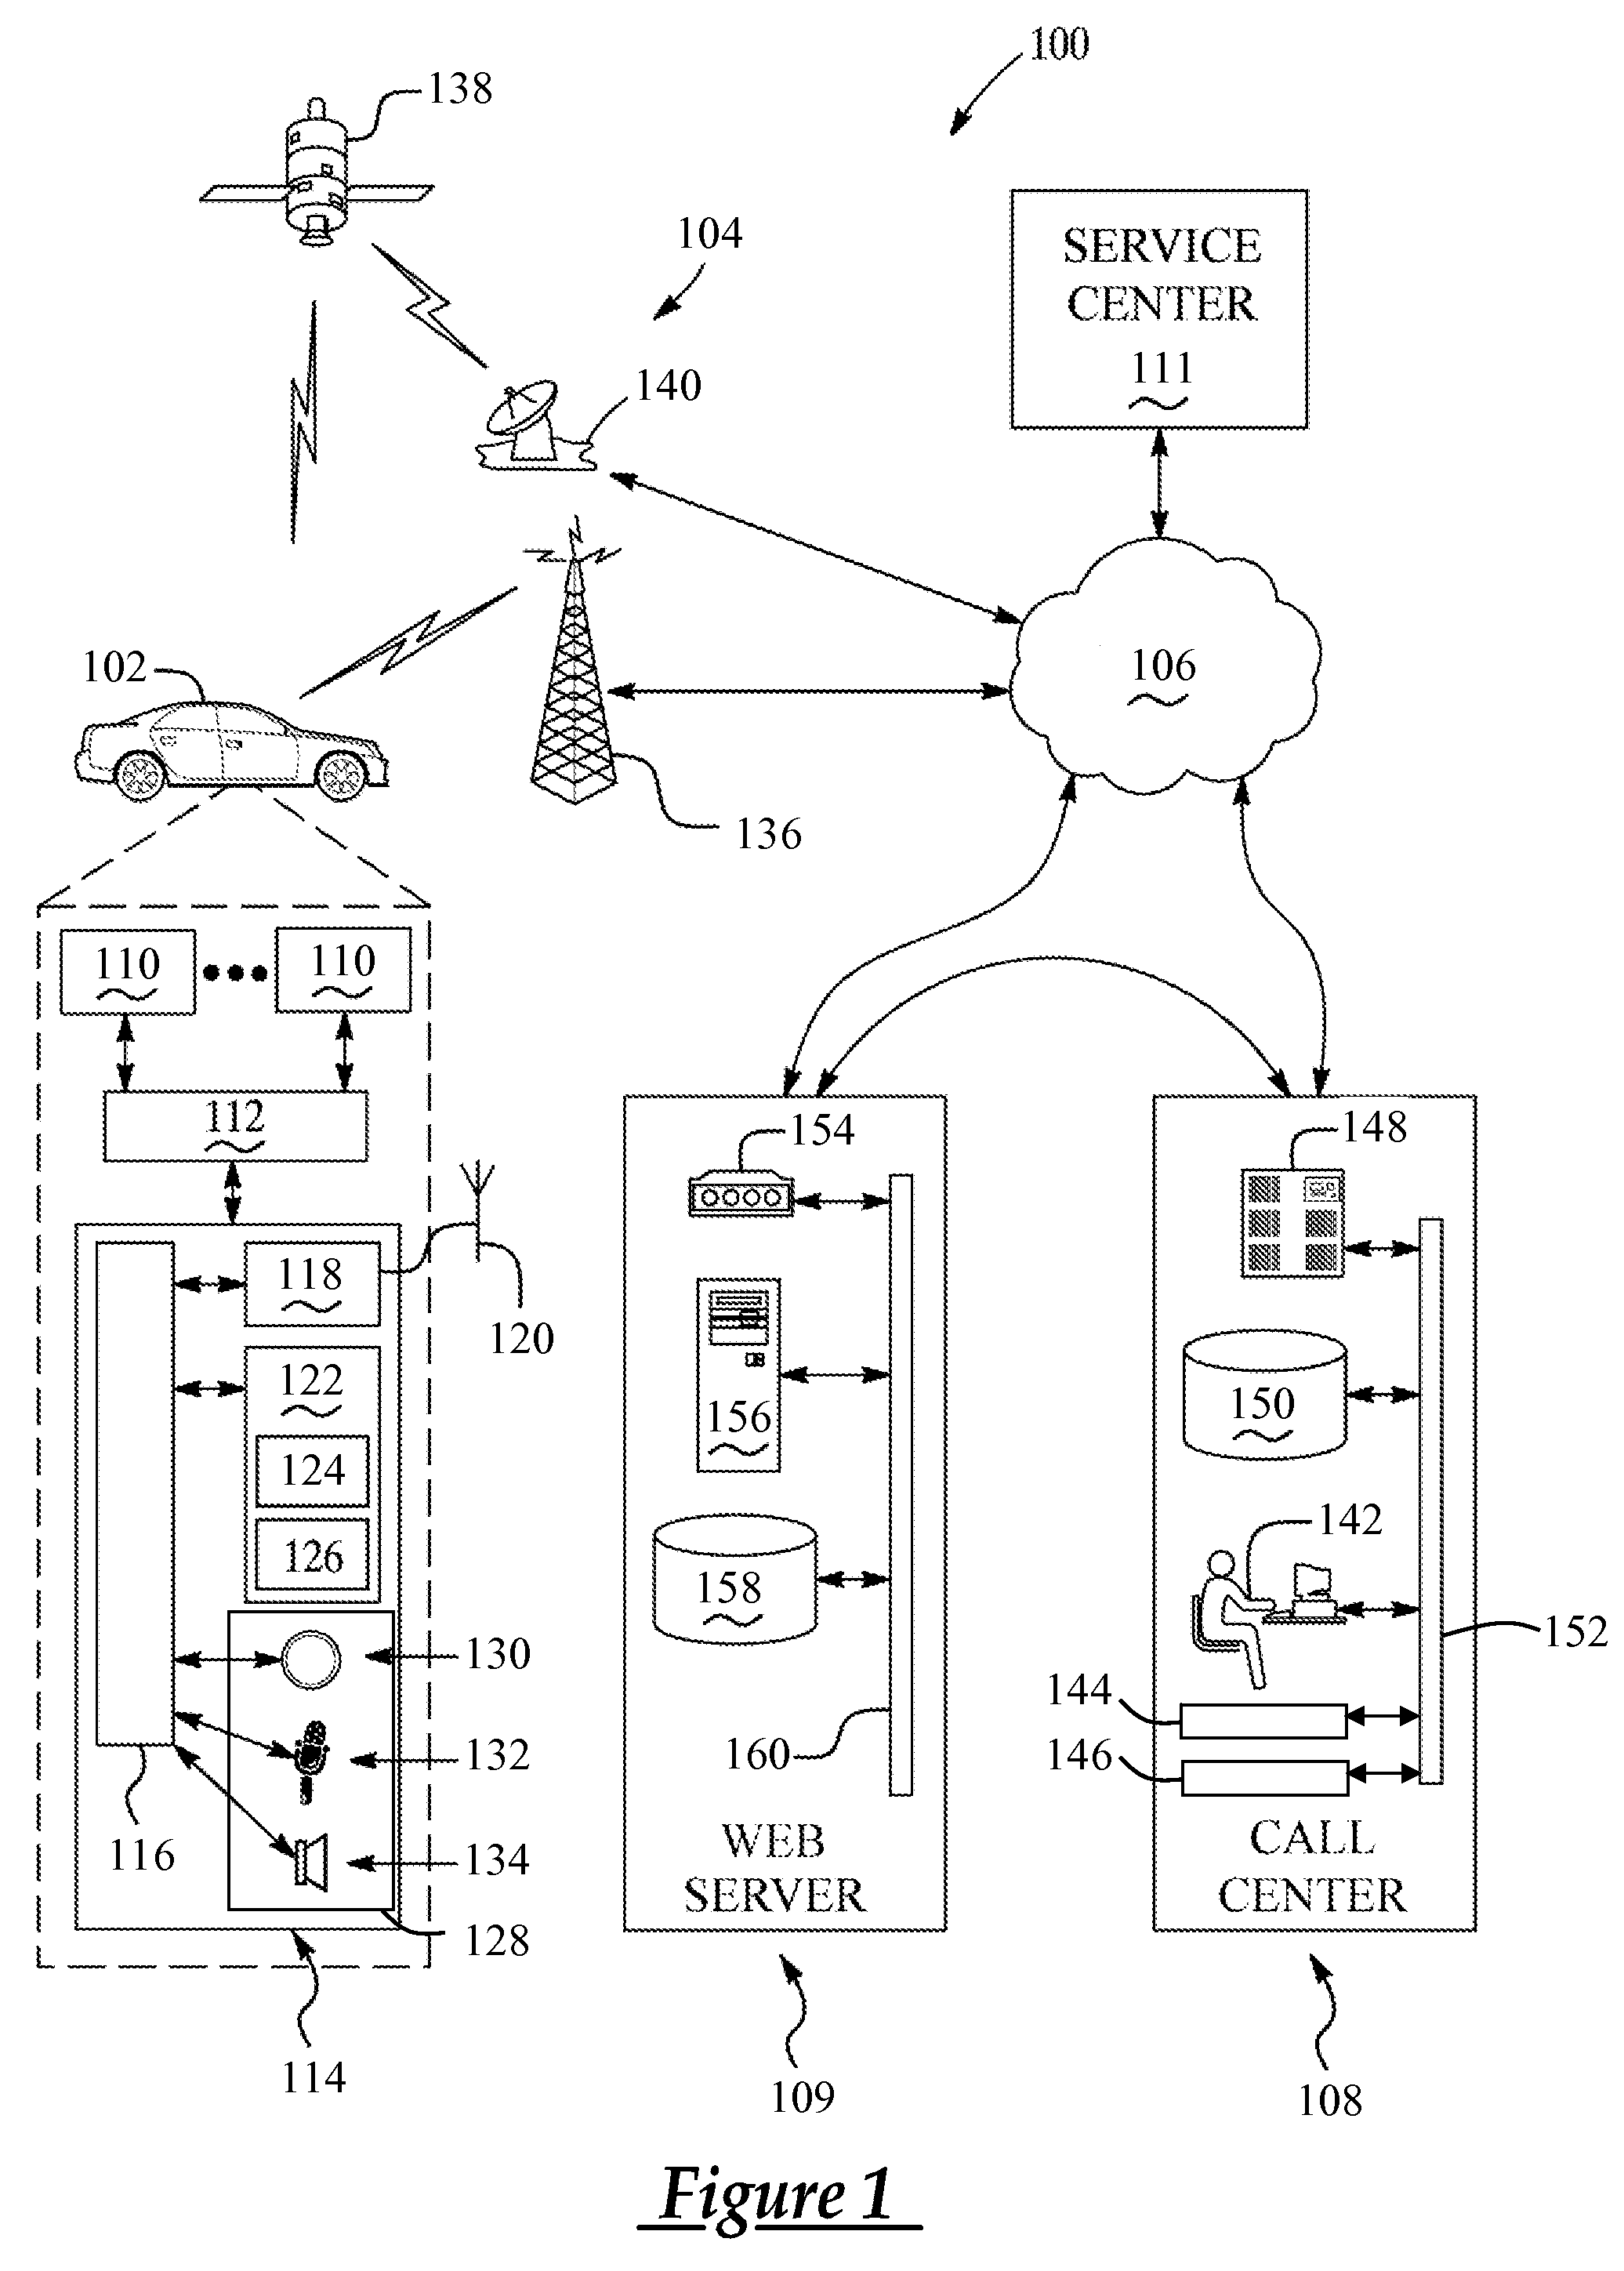 Applying speech recognition adaptation in an automated speech recognition system of a telematics-equipped vehicle